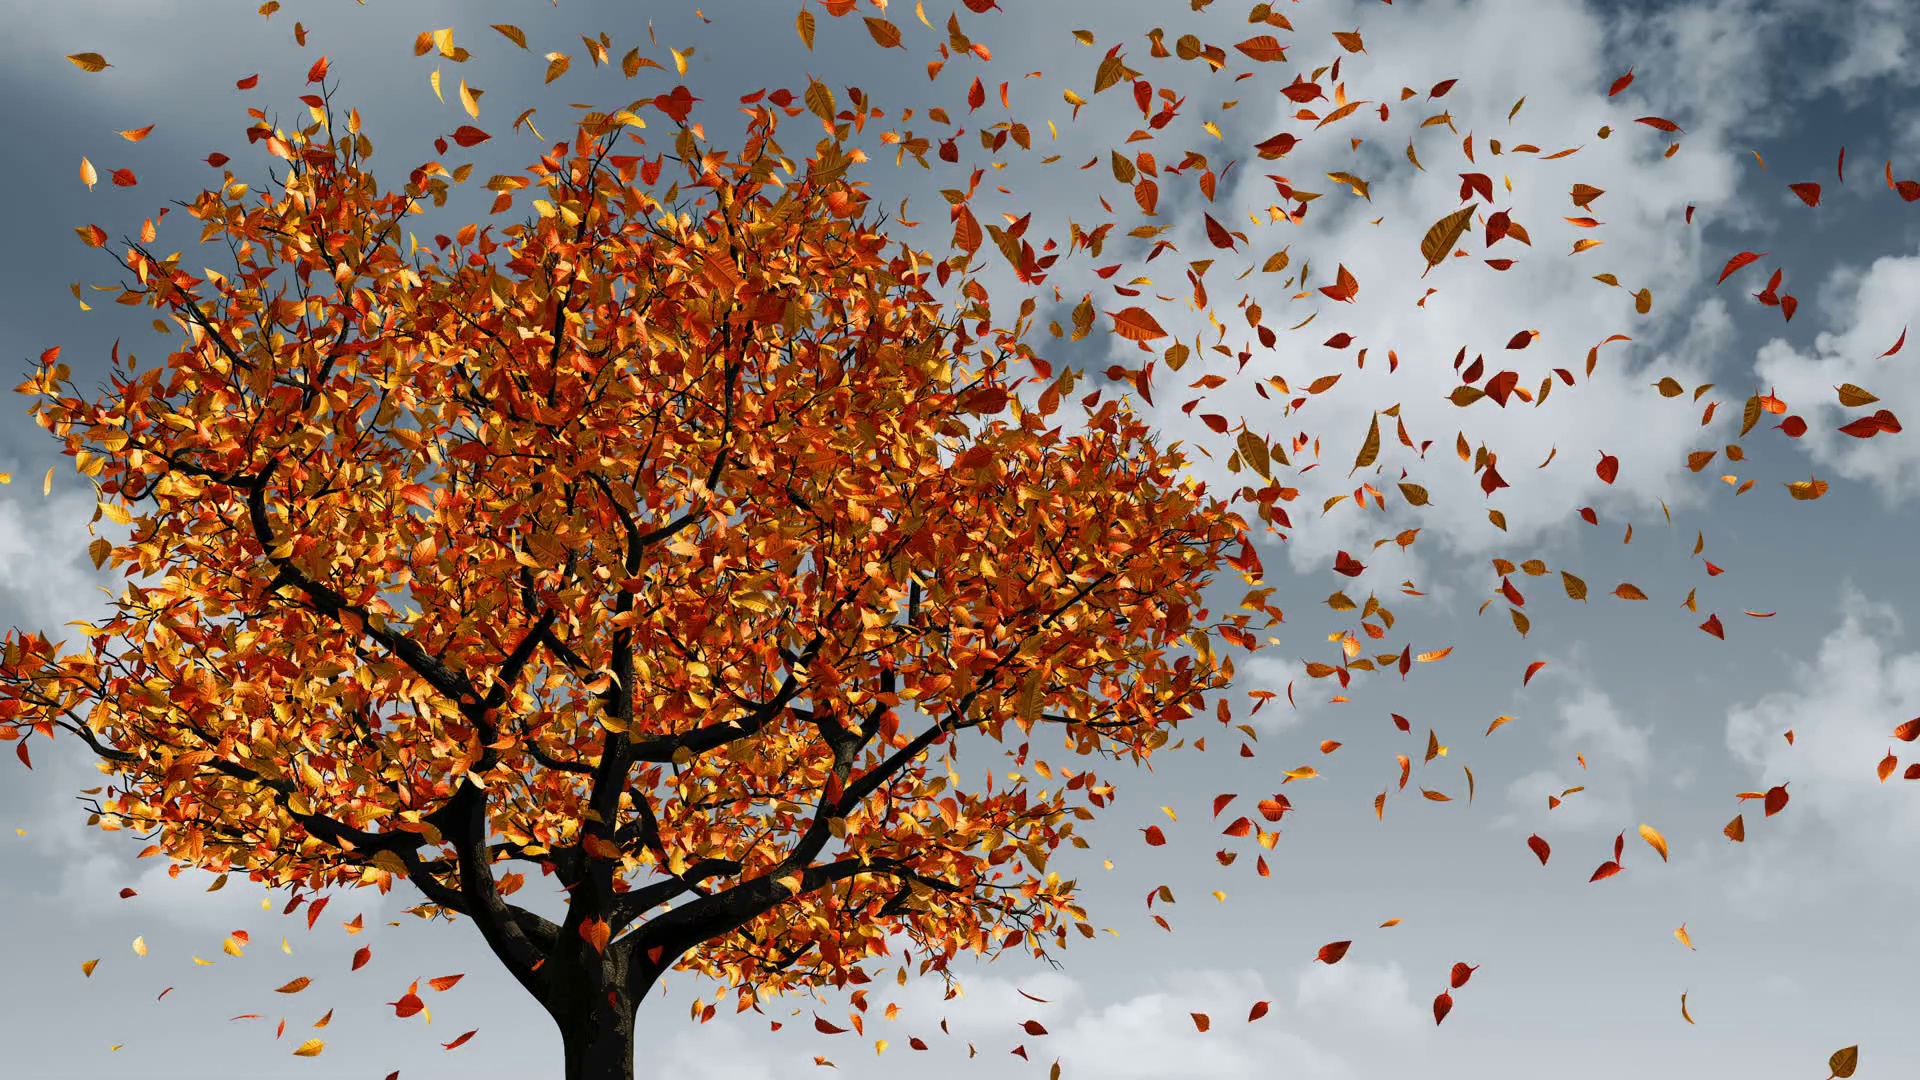 concept-of-changing-of-the-seasons-from-spring-to-autumn-leaves-appear-on-the-tree-they-turn-yellow-and-then-fall-off-3d-animation-4k-3840x2160_b0f3muokye_thumbnail-full13